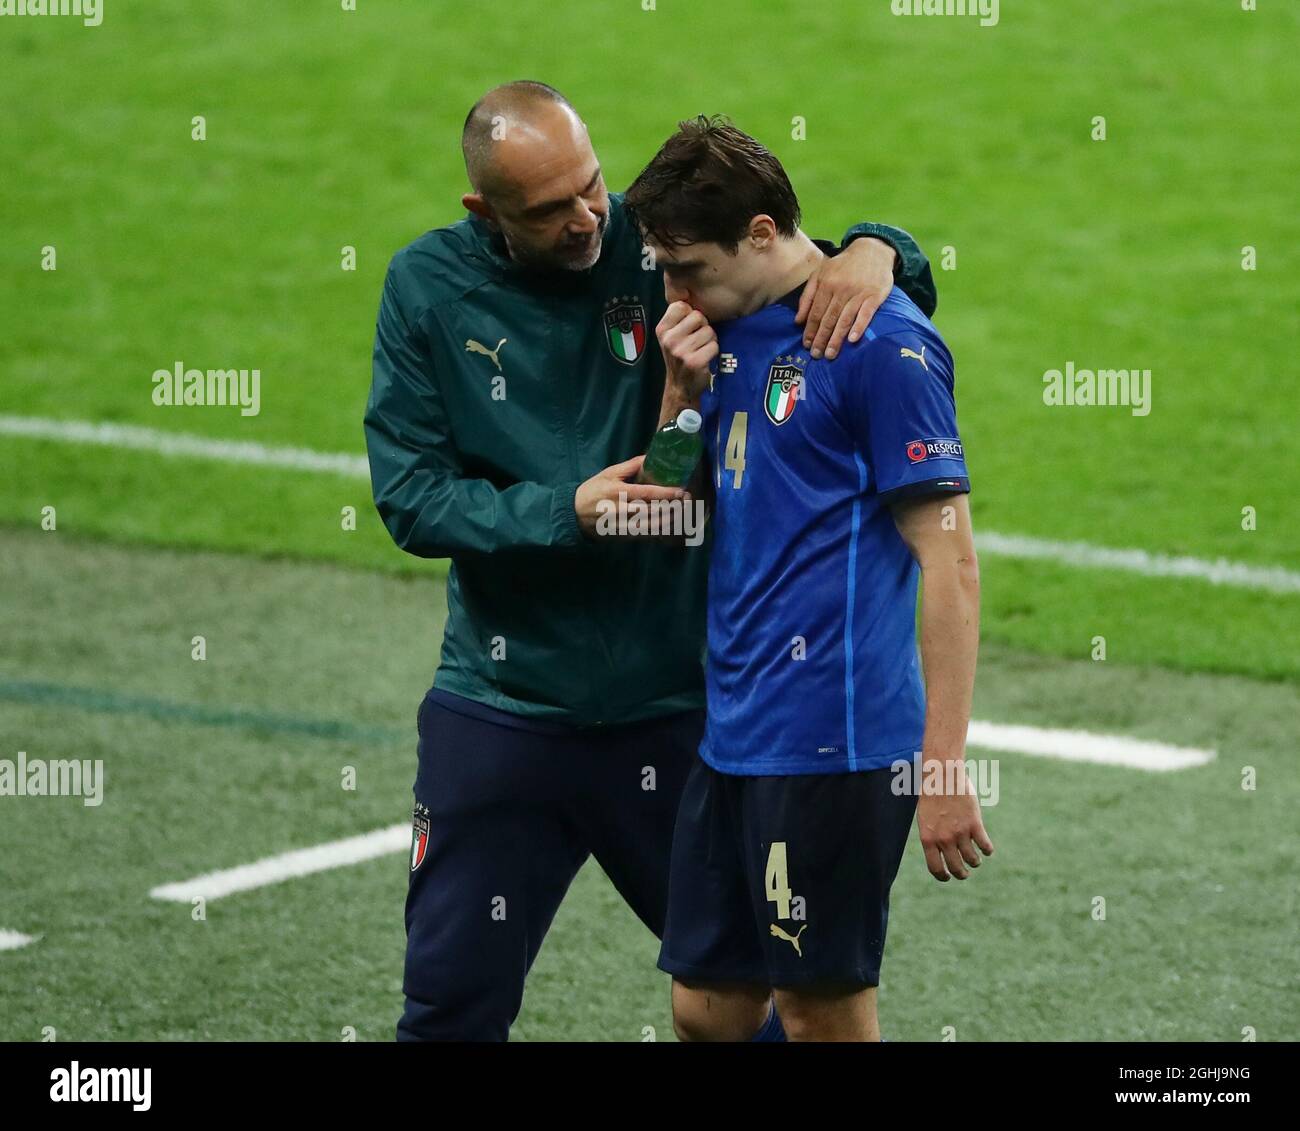 London, England, 11th July 2021. Federico Chiesa of Italy distraught after going off injured during the UEFA Euro 2020 final at Wembley Stadium, London. Picture credit should read: David Klein / Sportimage via PA Images Stock Photo